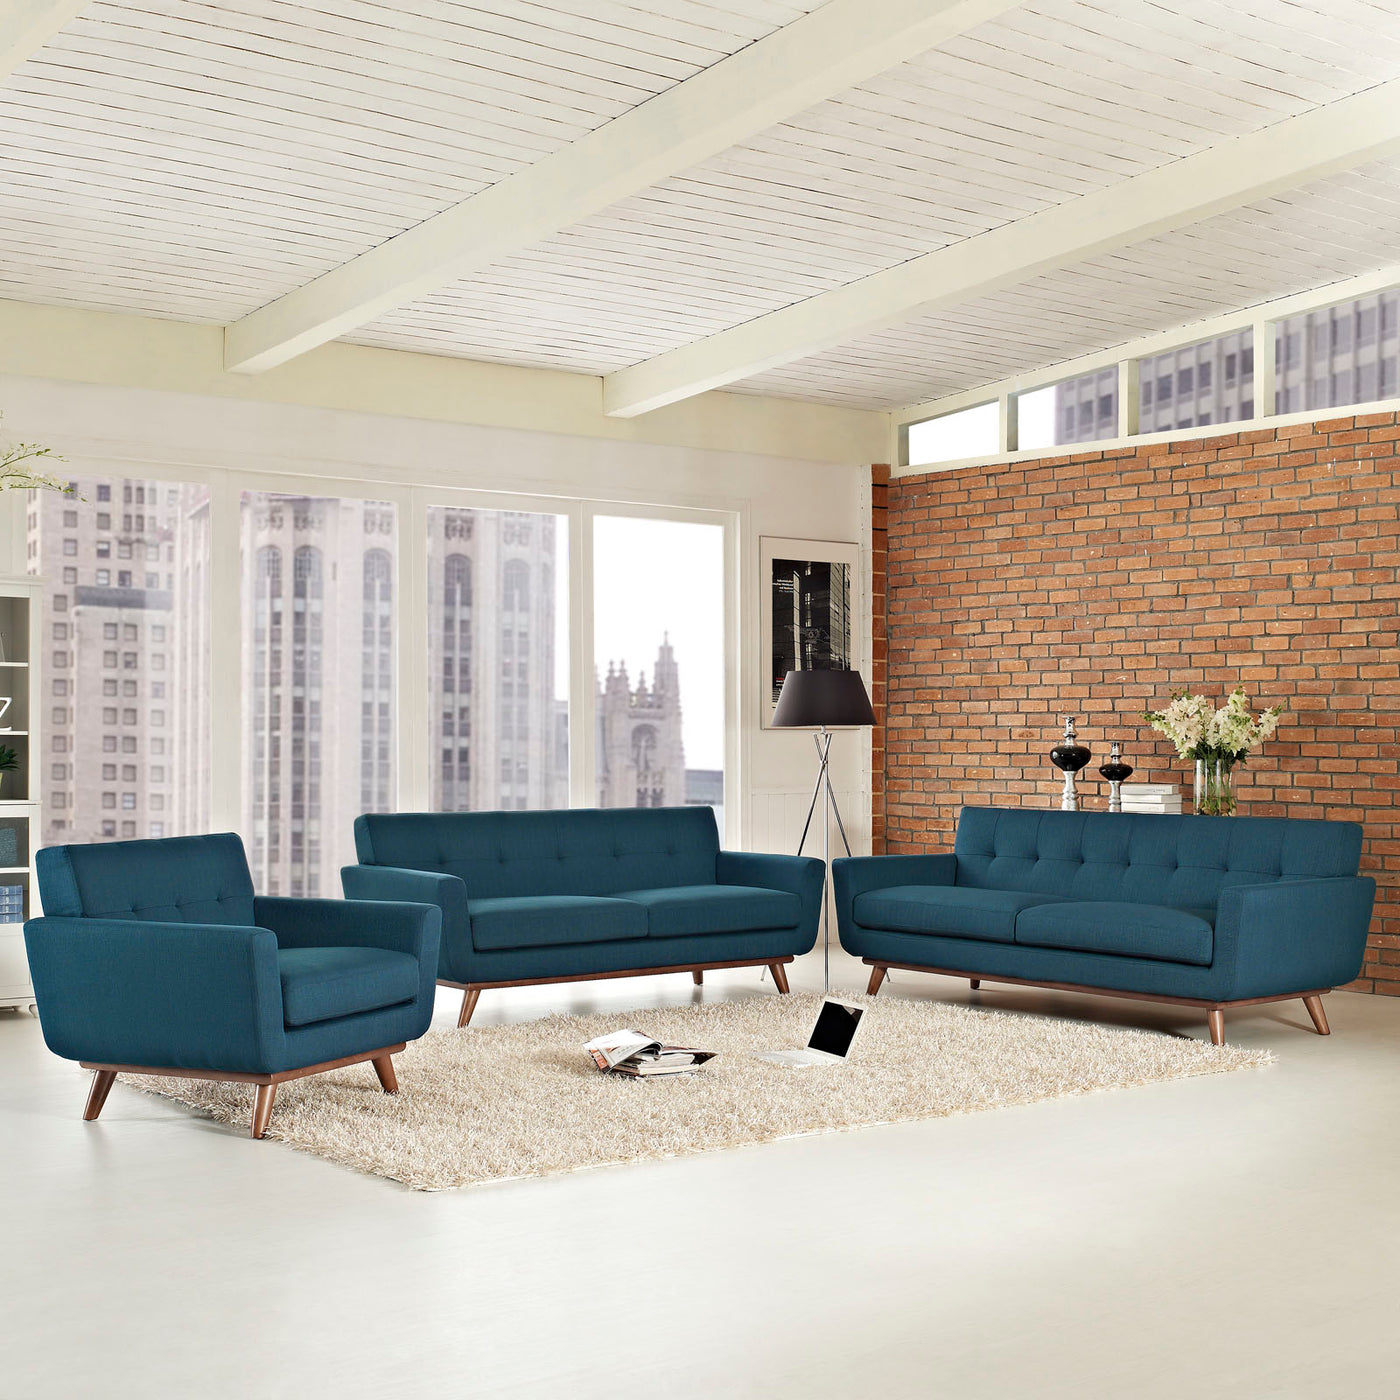 Engage Sofa Loveseat and Armchair Set of 3